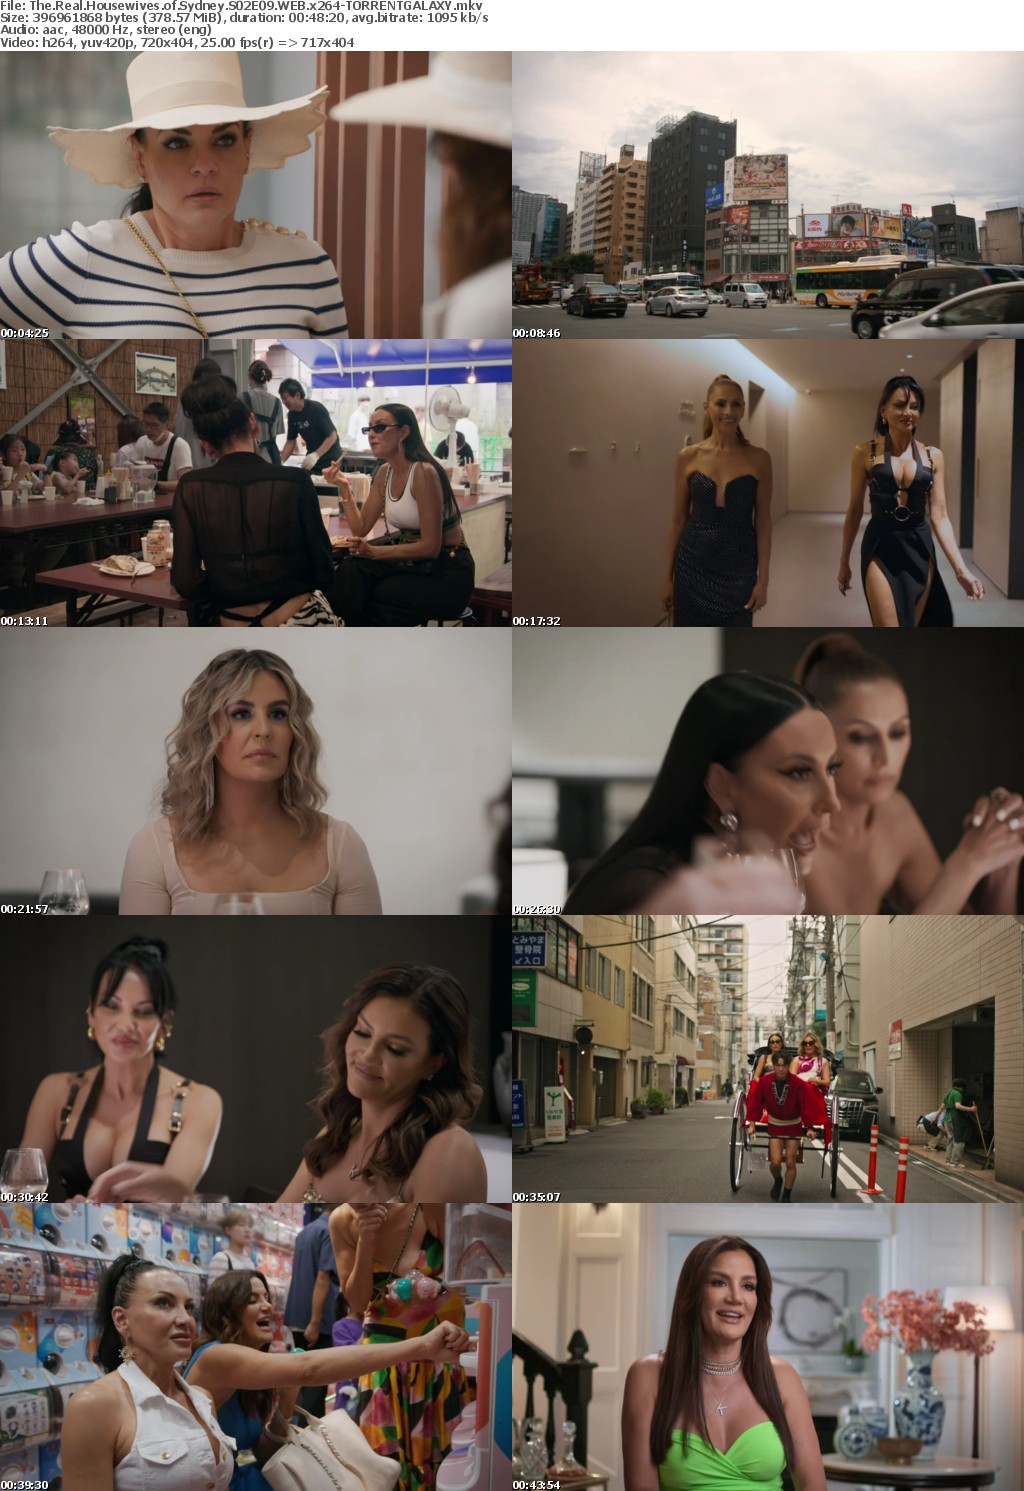 The Real Housewives of Sydney S02E09 WEB x264-GALAXY